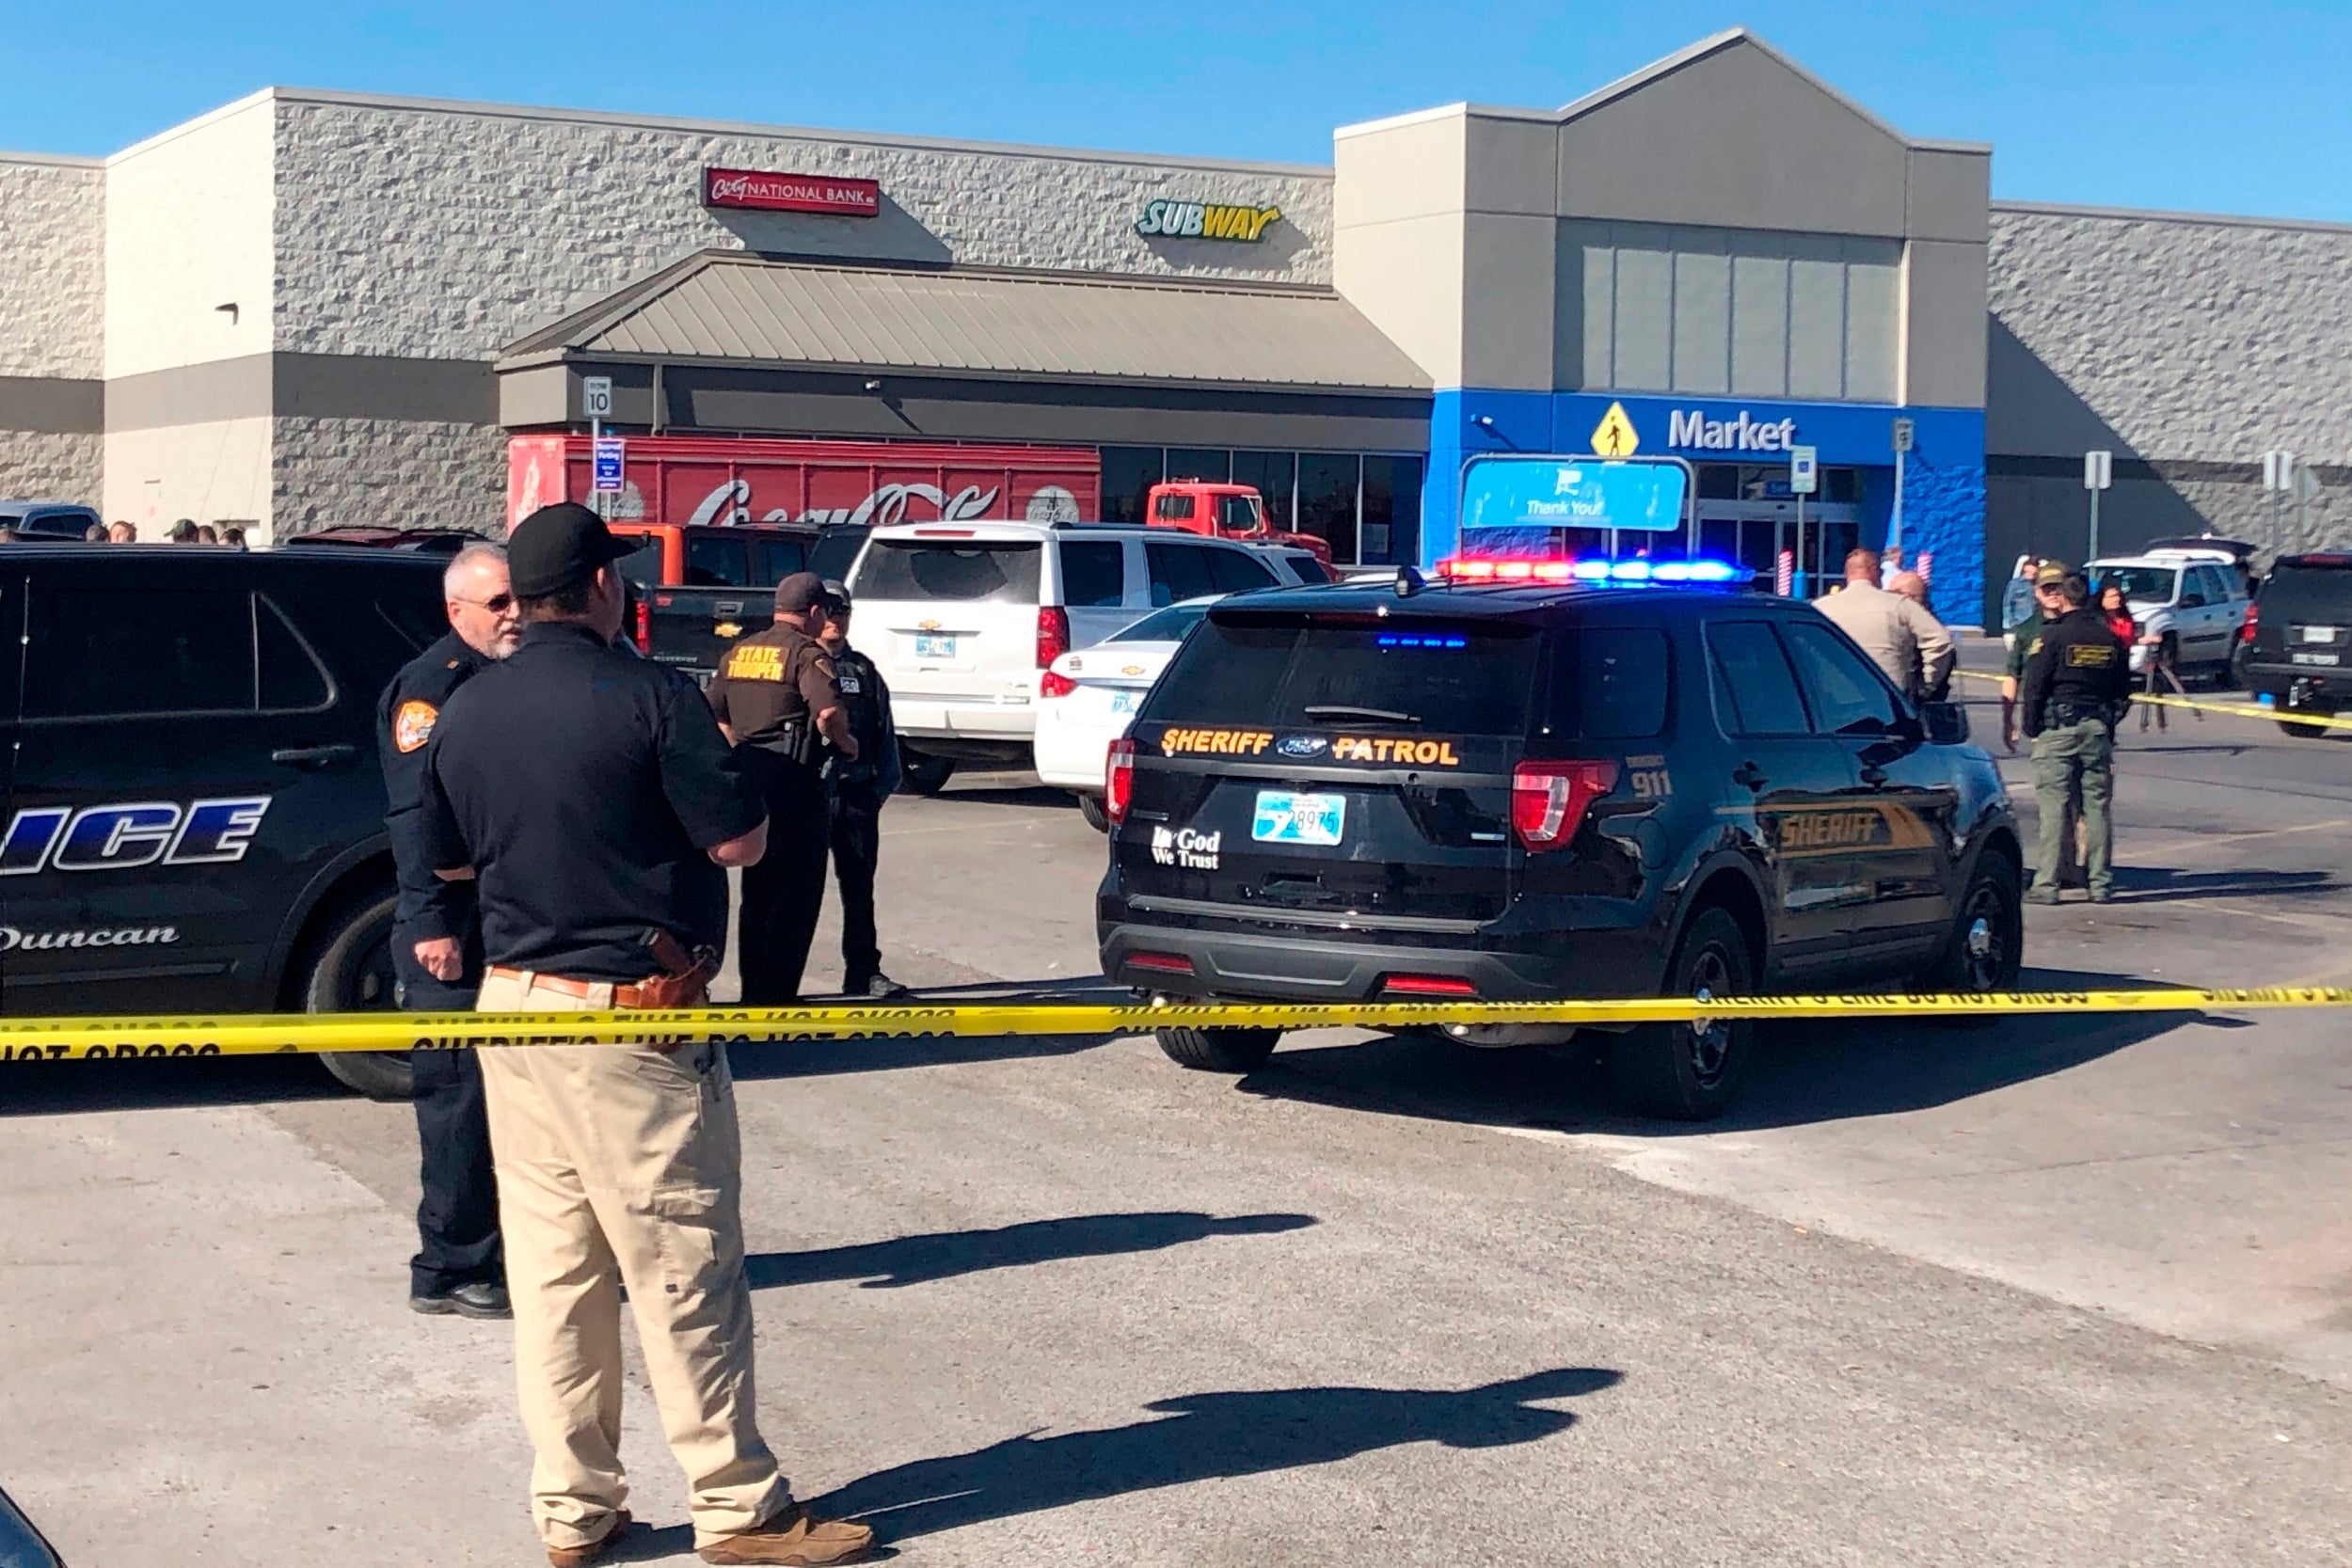 Police officers at the scene of a shooting at a Walmart in Duncan, Oklahoma